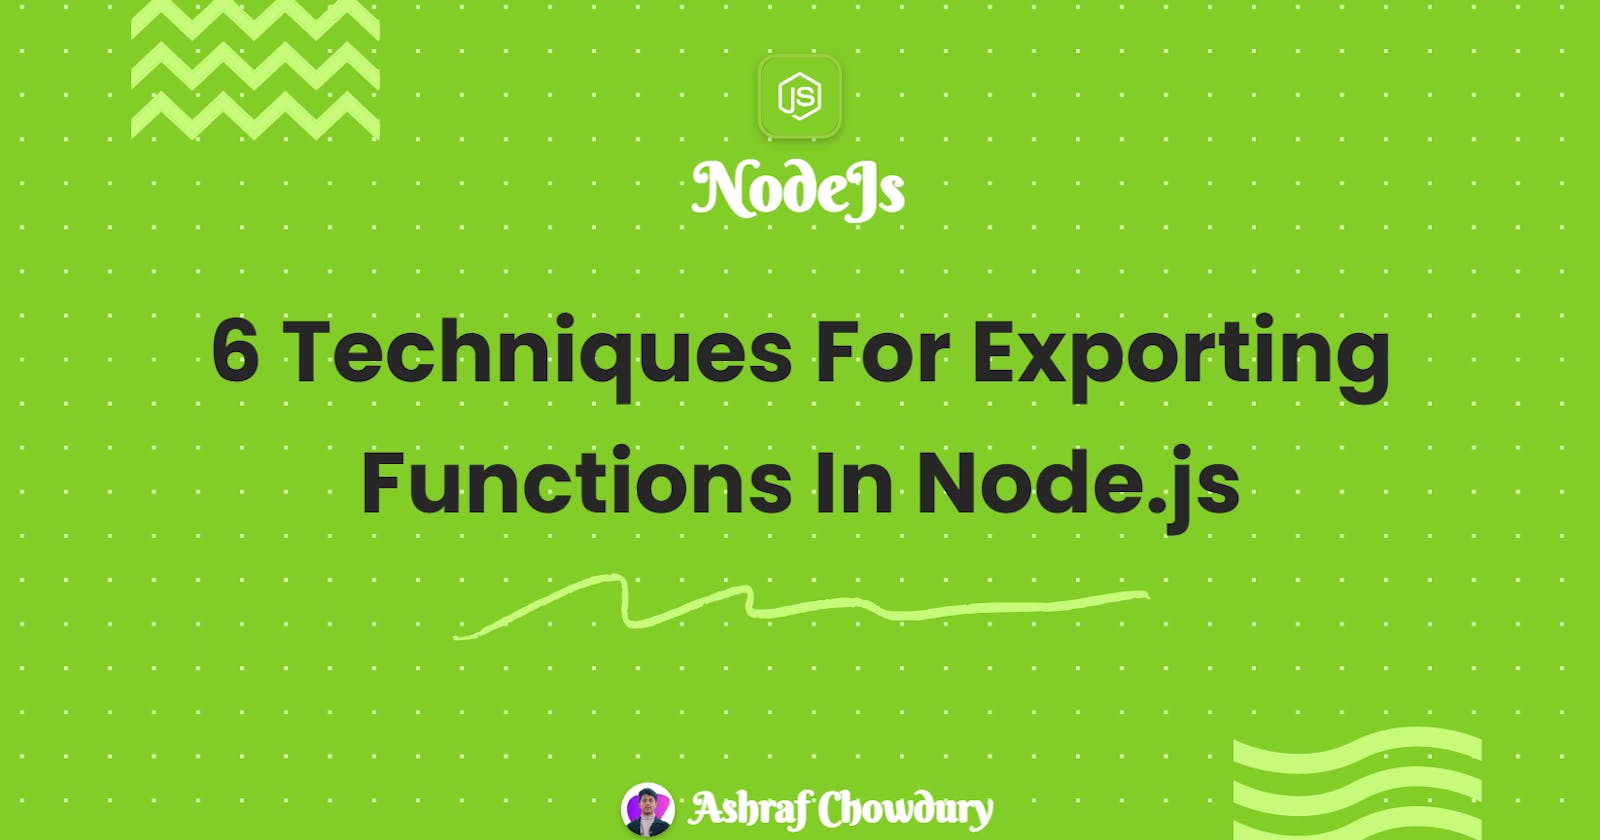 6 Techniques for Exporting Functions in Node.js